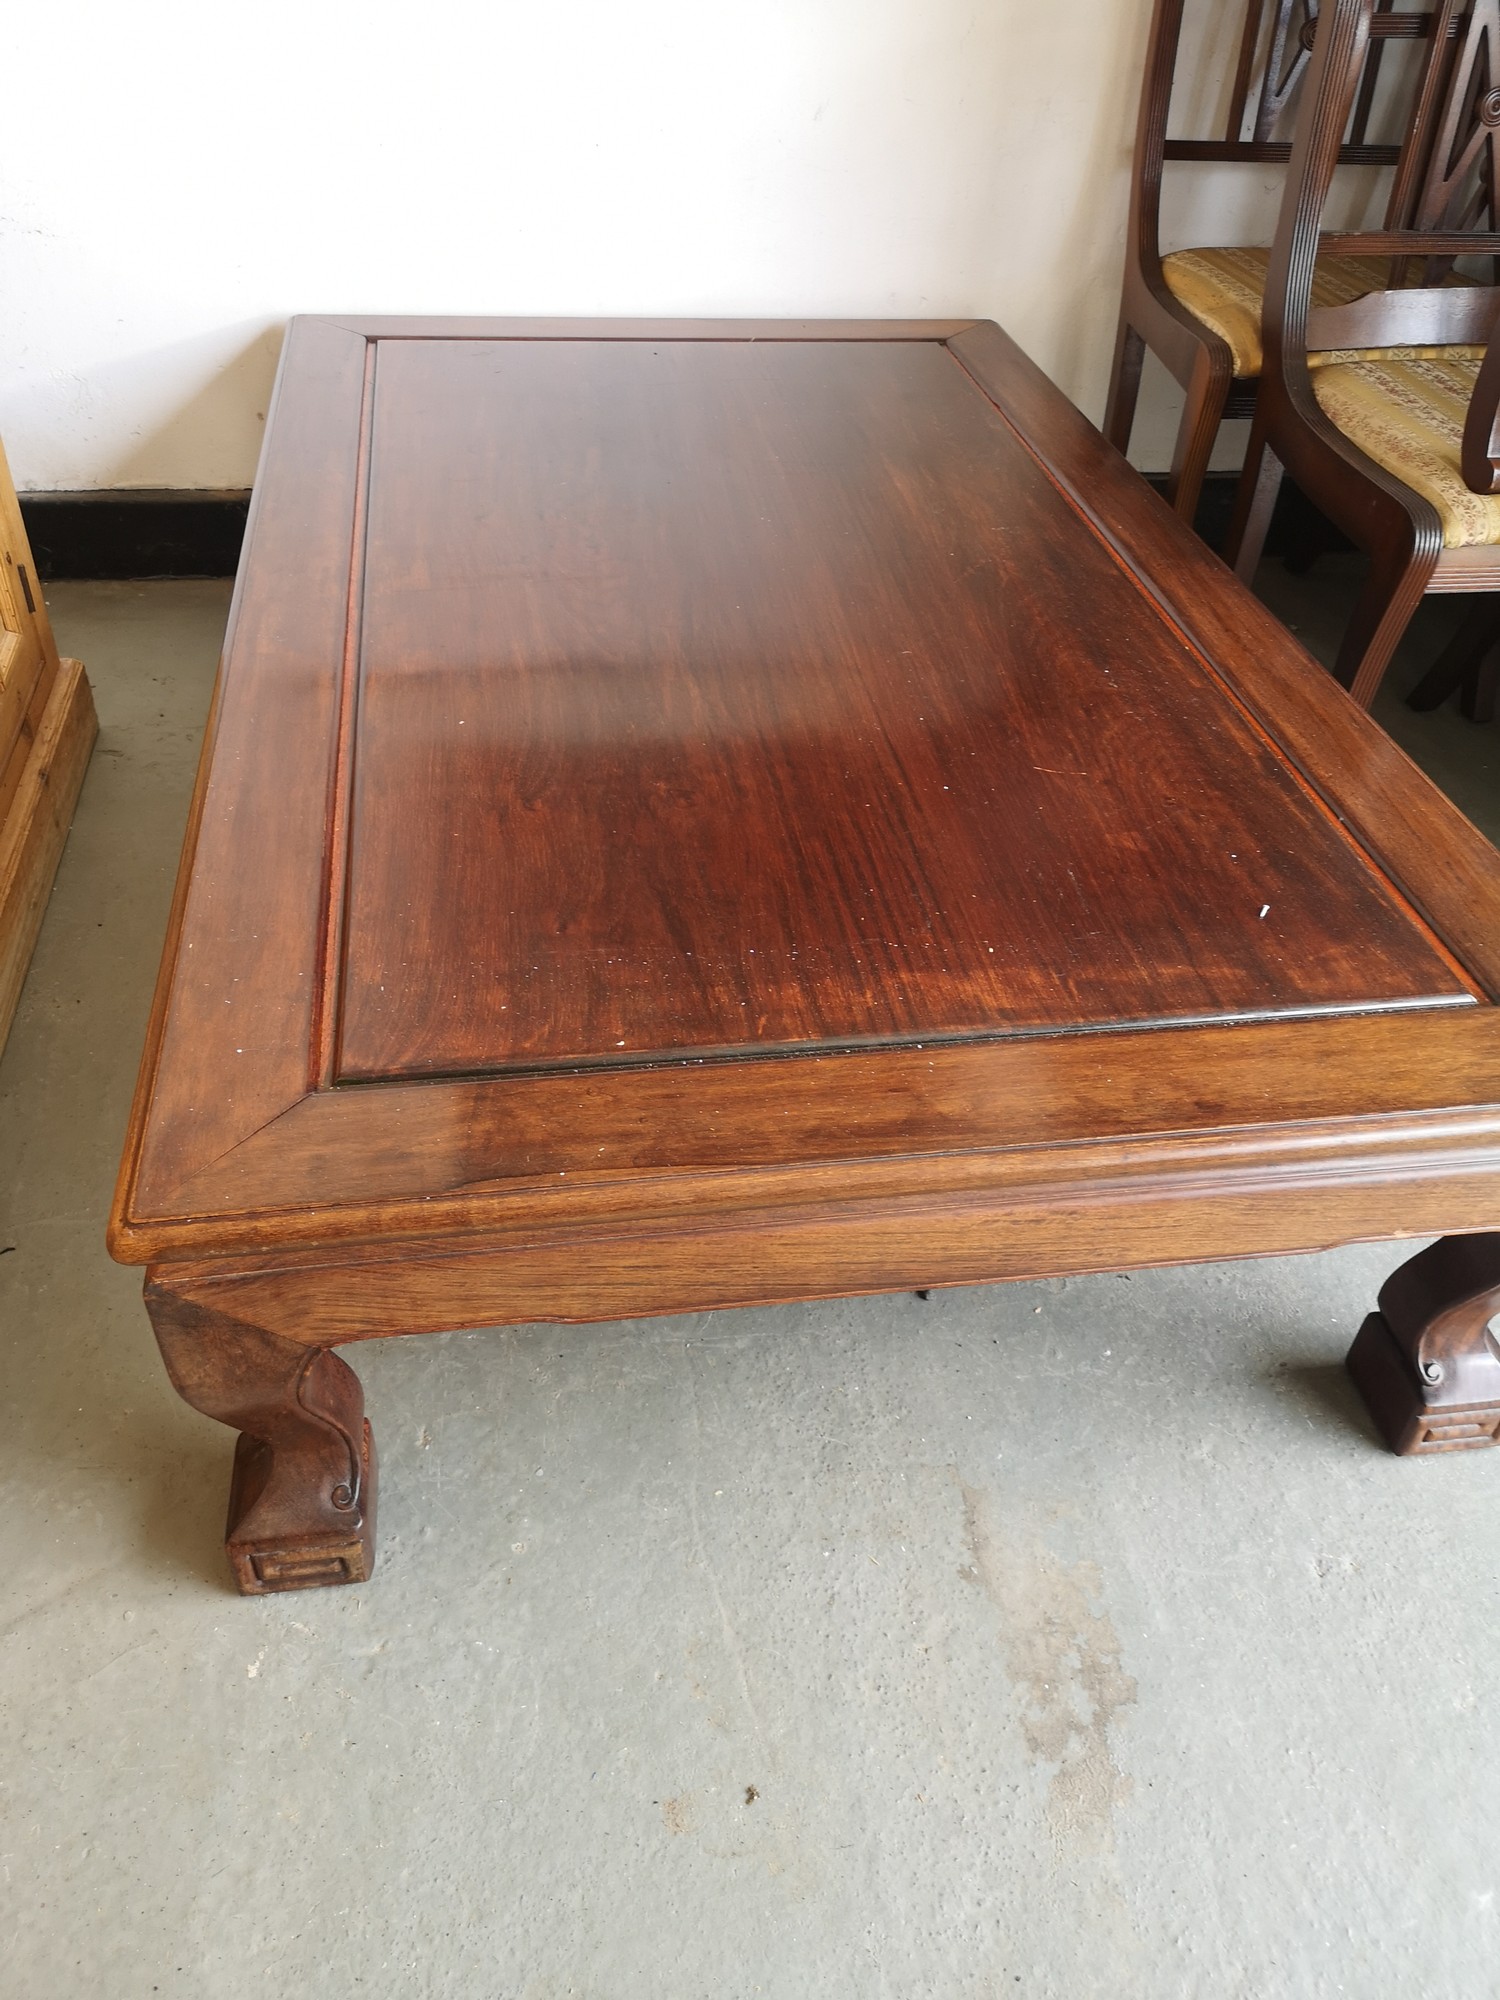 Oriental rosewood coffee table with carved supports. - Image 2 of 2